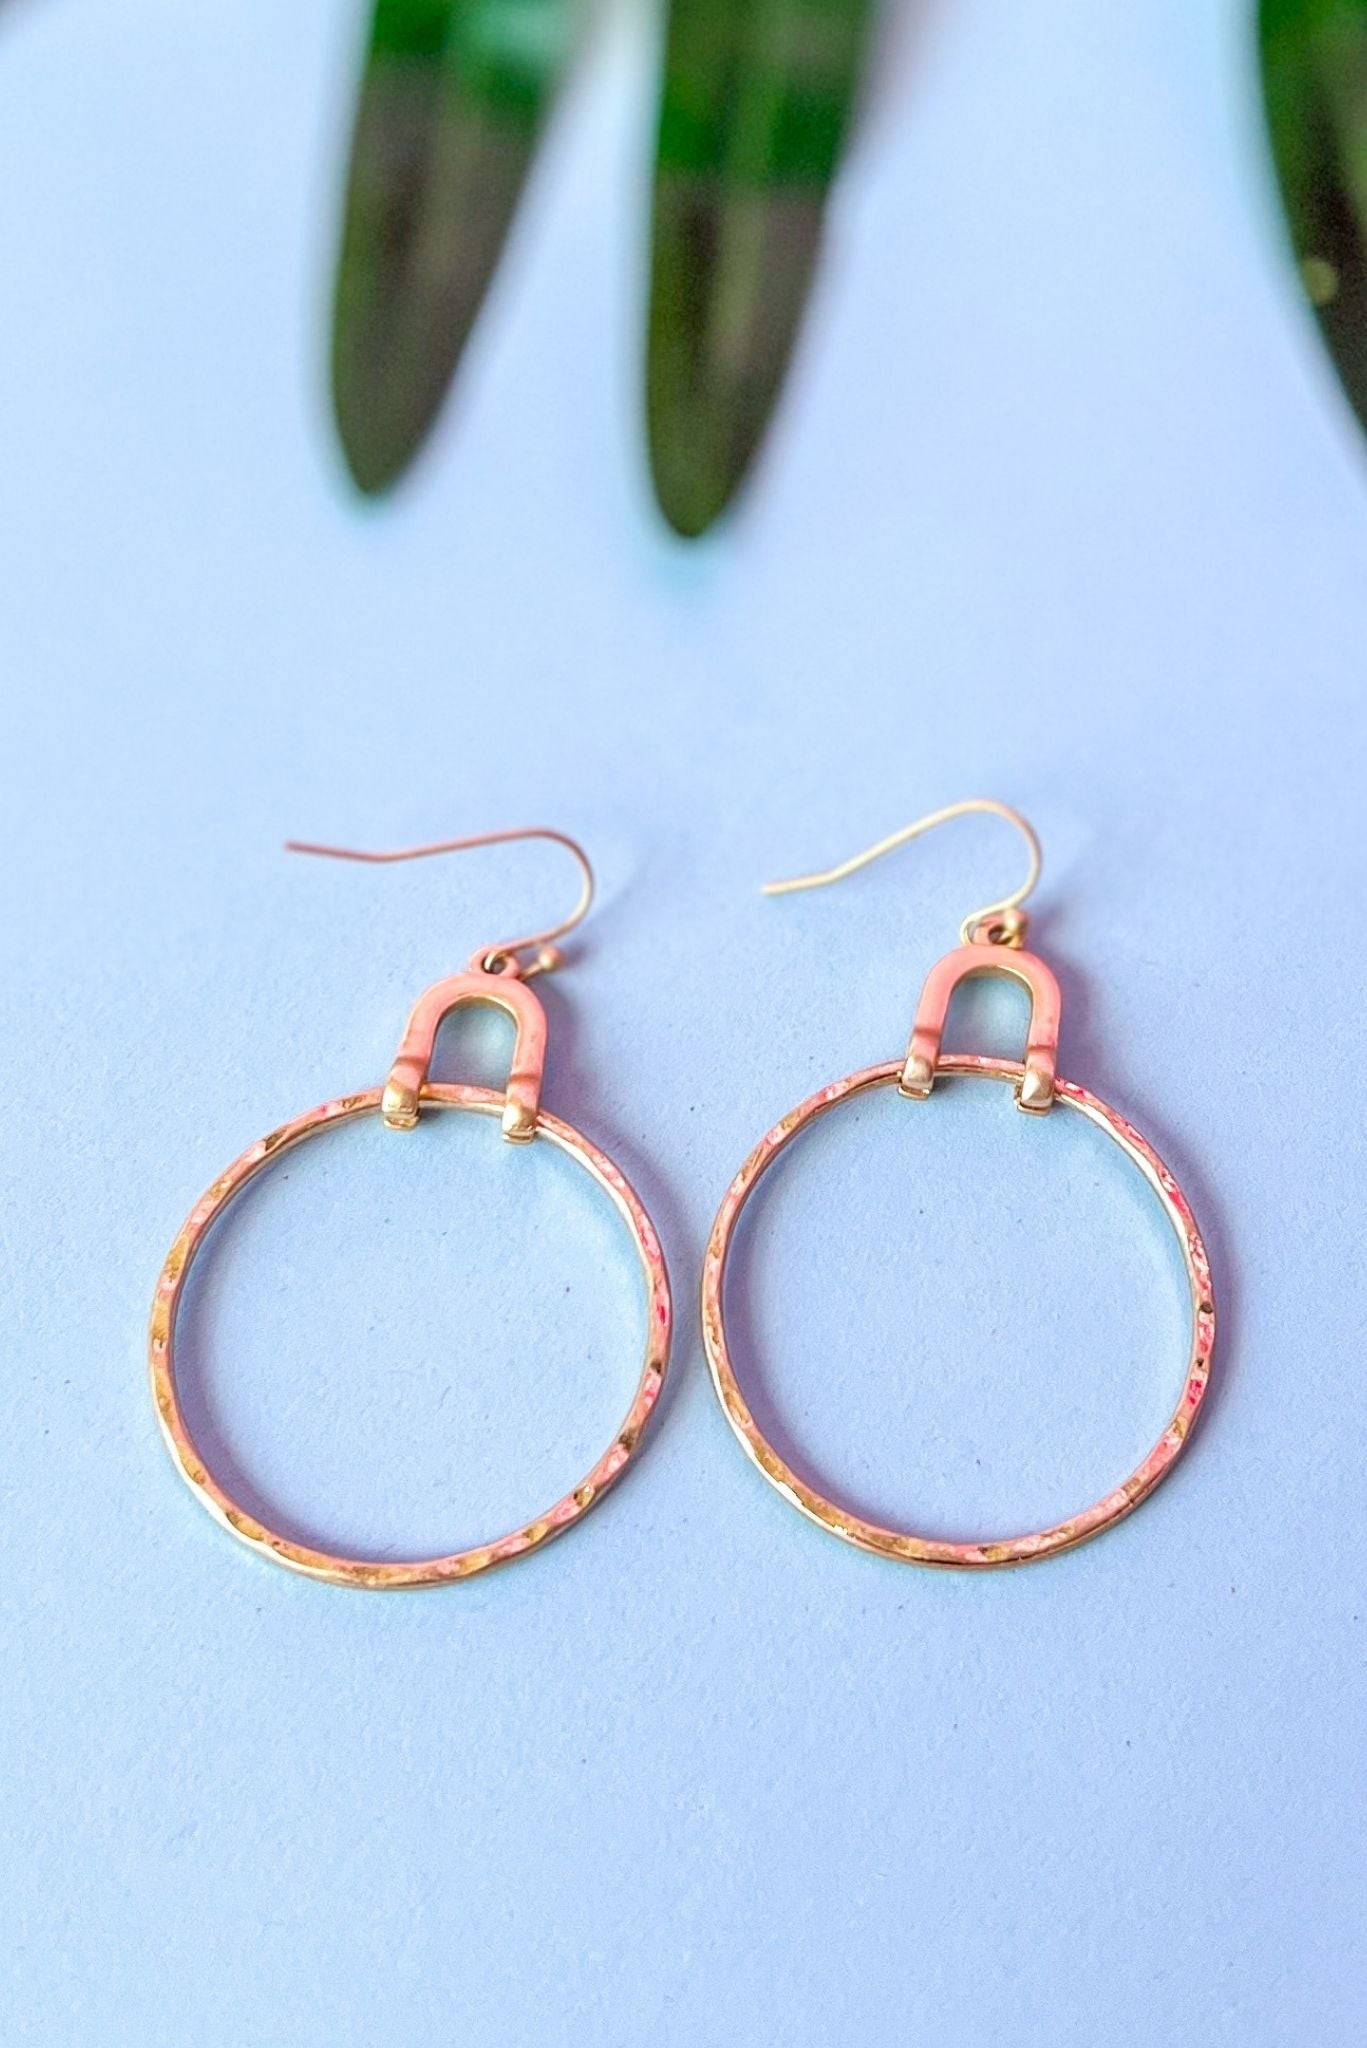 Gold Textured Metal Circle Dangle Earrings,, abstract detail, hoop, elevated look, must have, shop style your senses by mallory fitzismmons